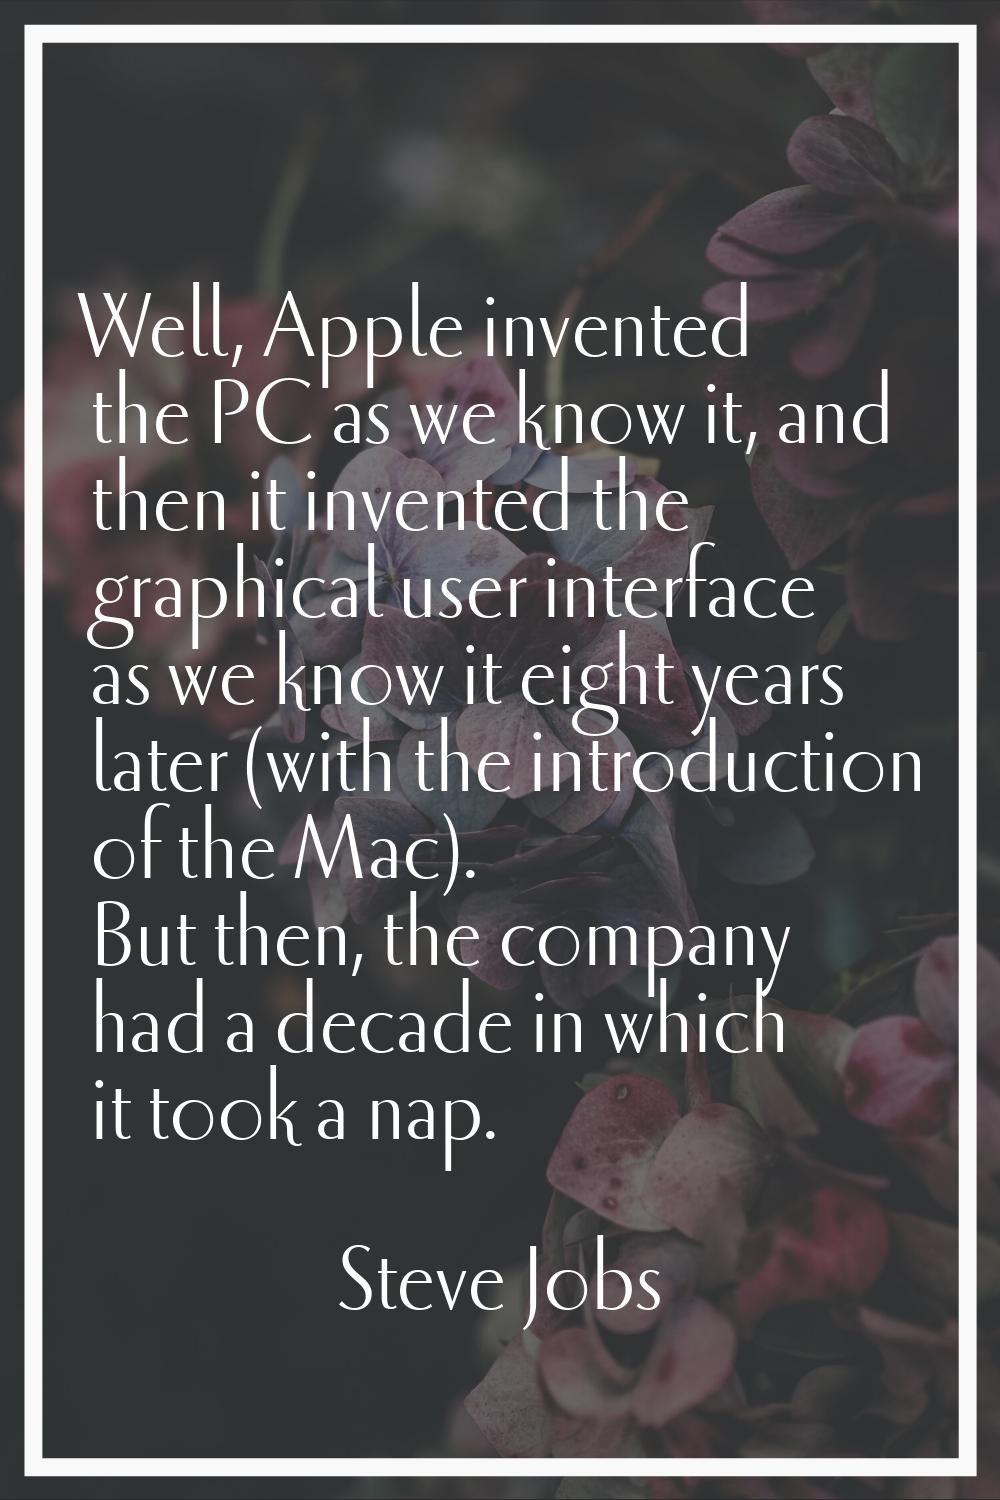 Well, Apple invented the PC as we know it, and then it invented the graphical user interface as we 